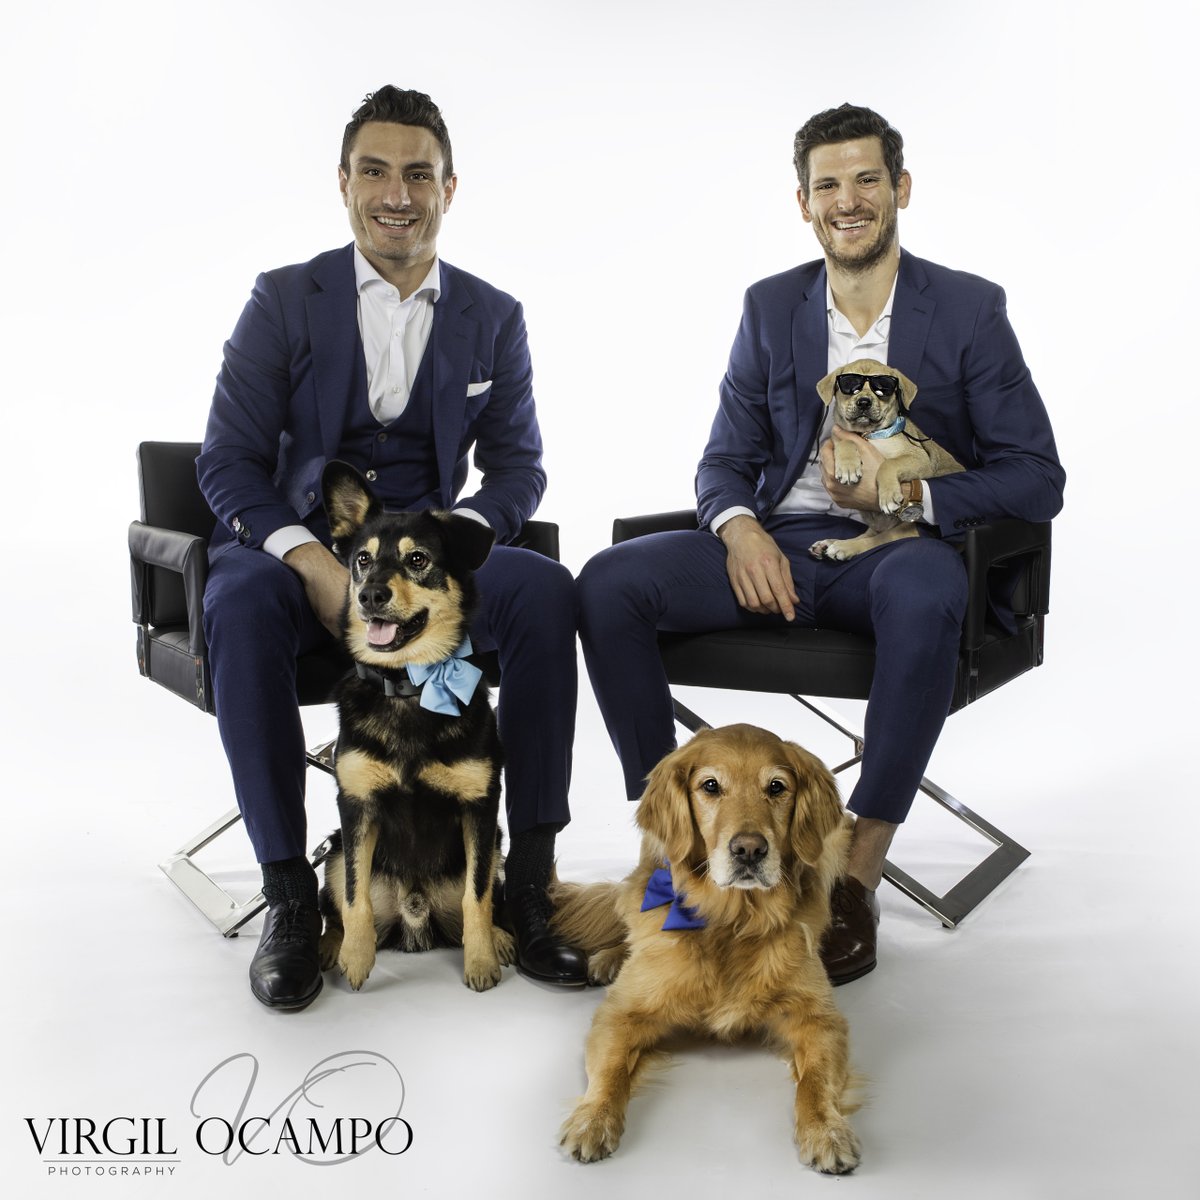 Excited to help raise money for a great cause and be featured in the @Capitals #CapsCanineCalendar with my dog Huck. Make sure to get a copy before they sell out locally at @ShopMedStarCaps or @TeamShopAtCOA or online at WashCaps.com/CanineCalendars – proceeds benefit @WTARescue